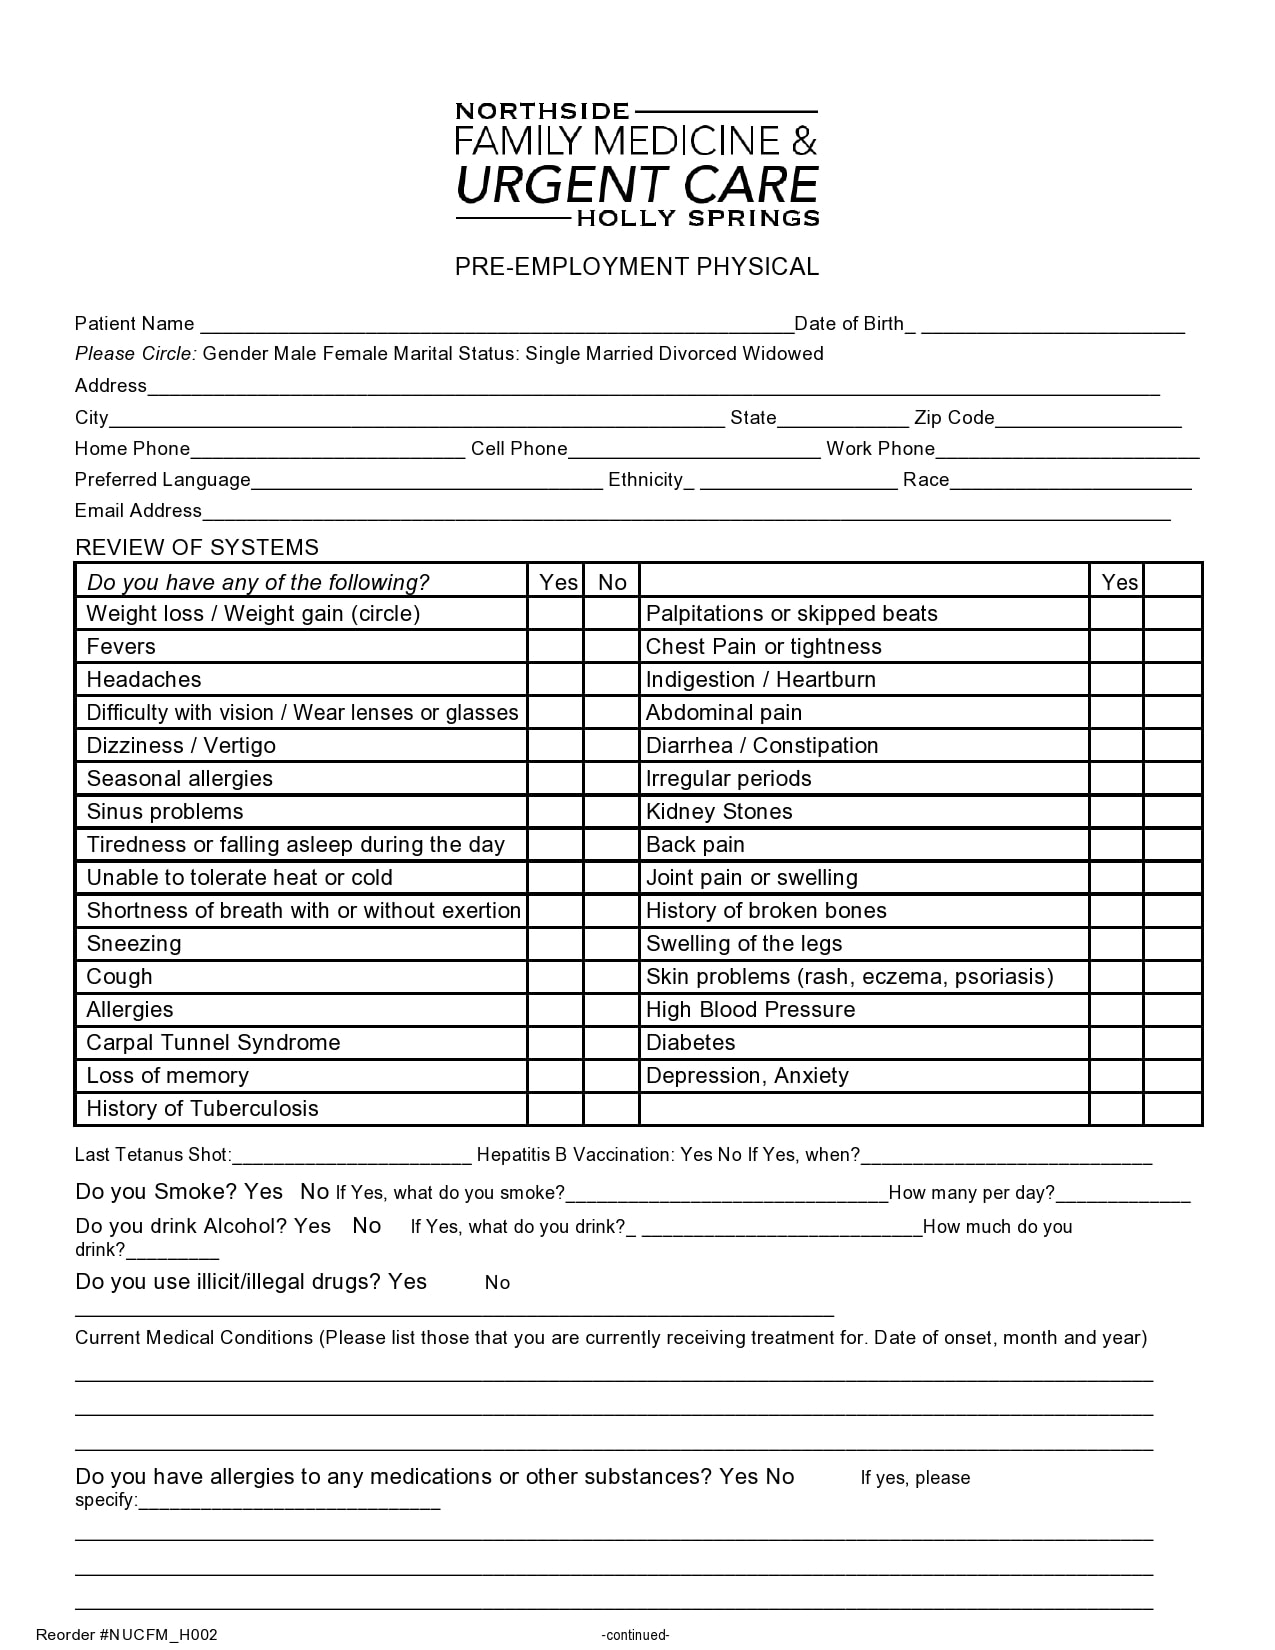 Pre Employment Physical Forms Printable ProjectOpenLetter com